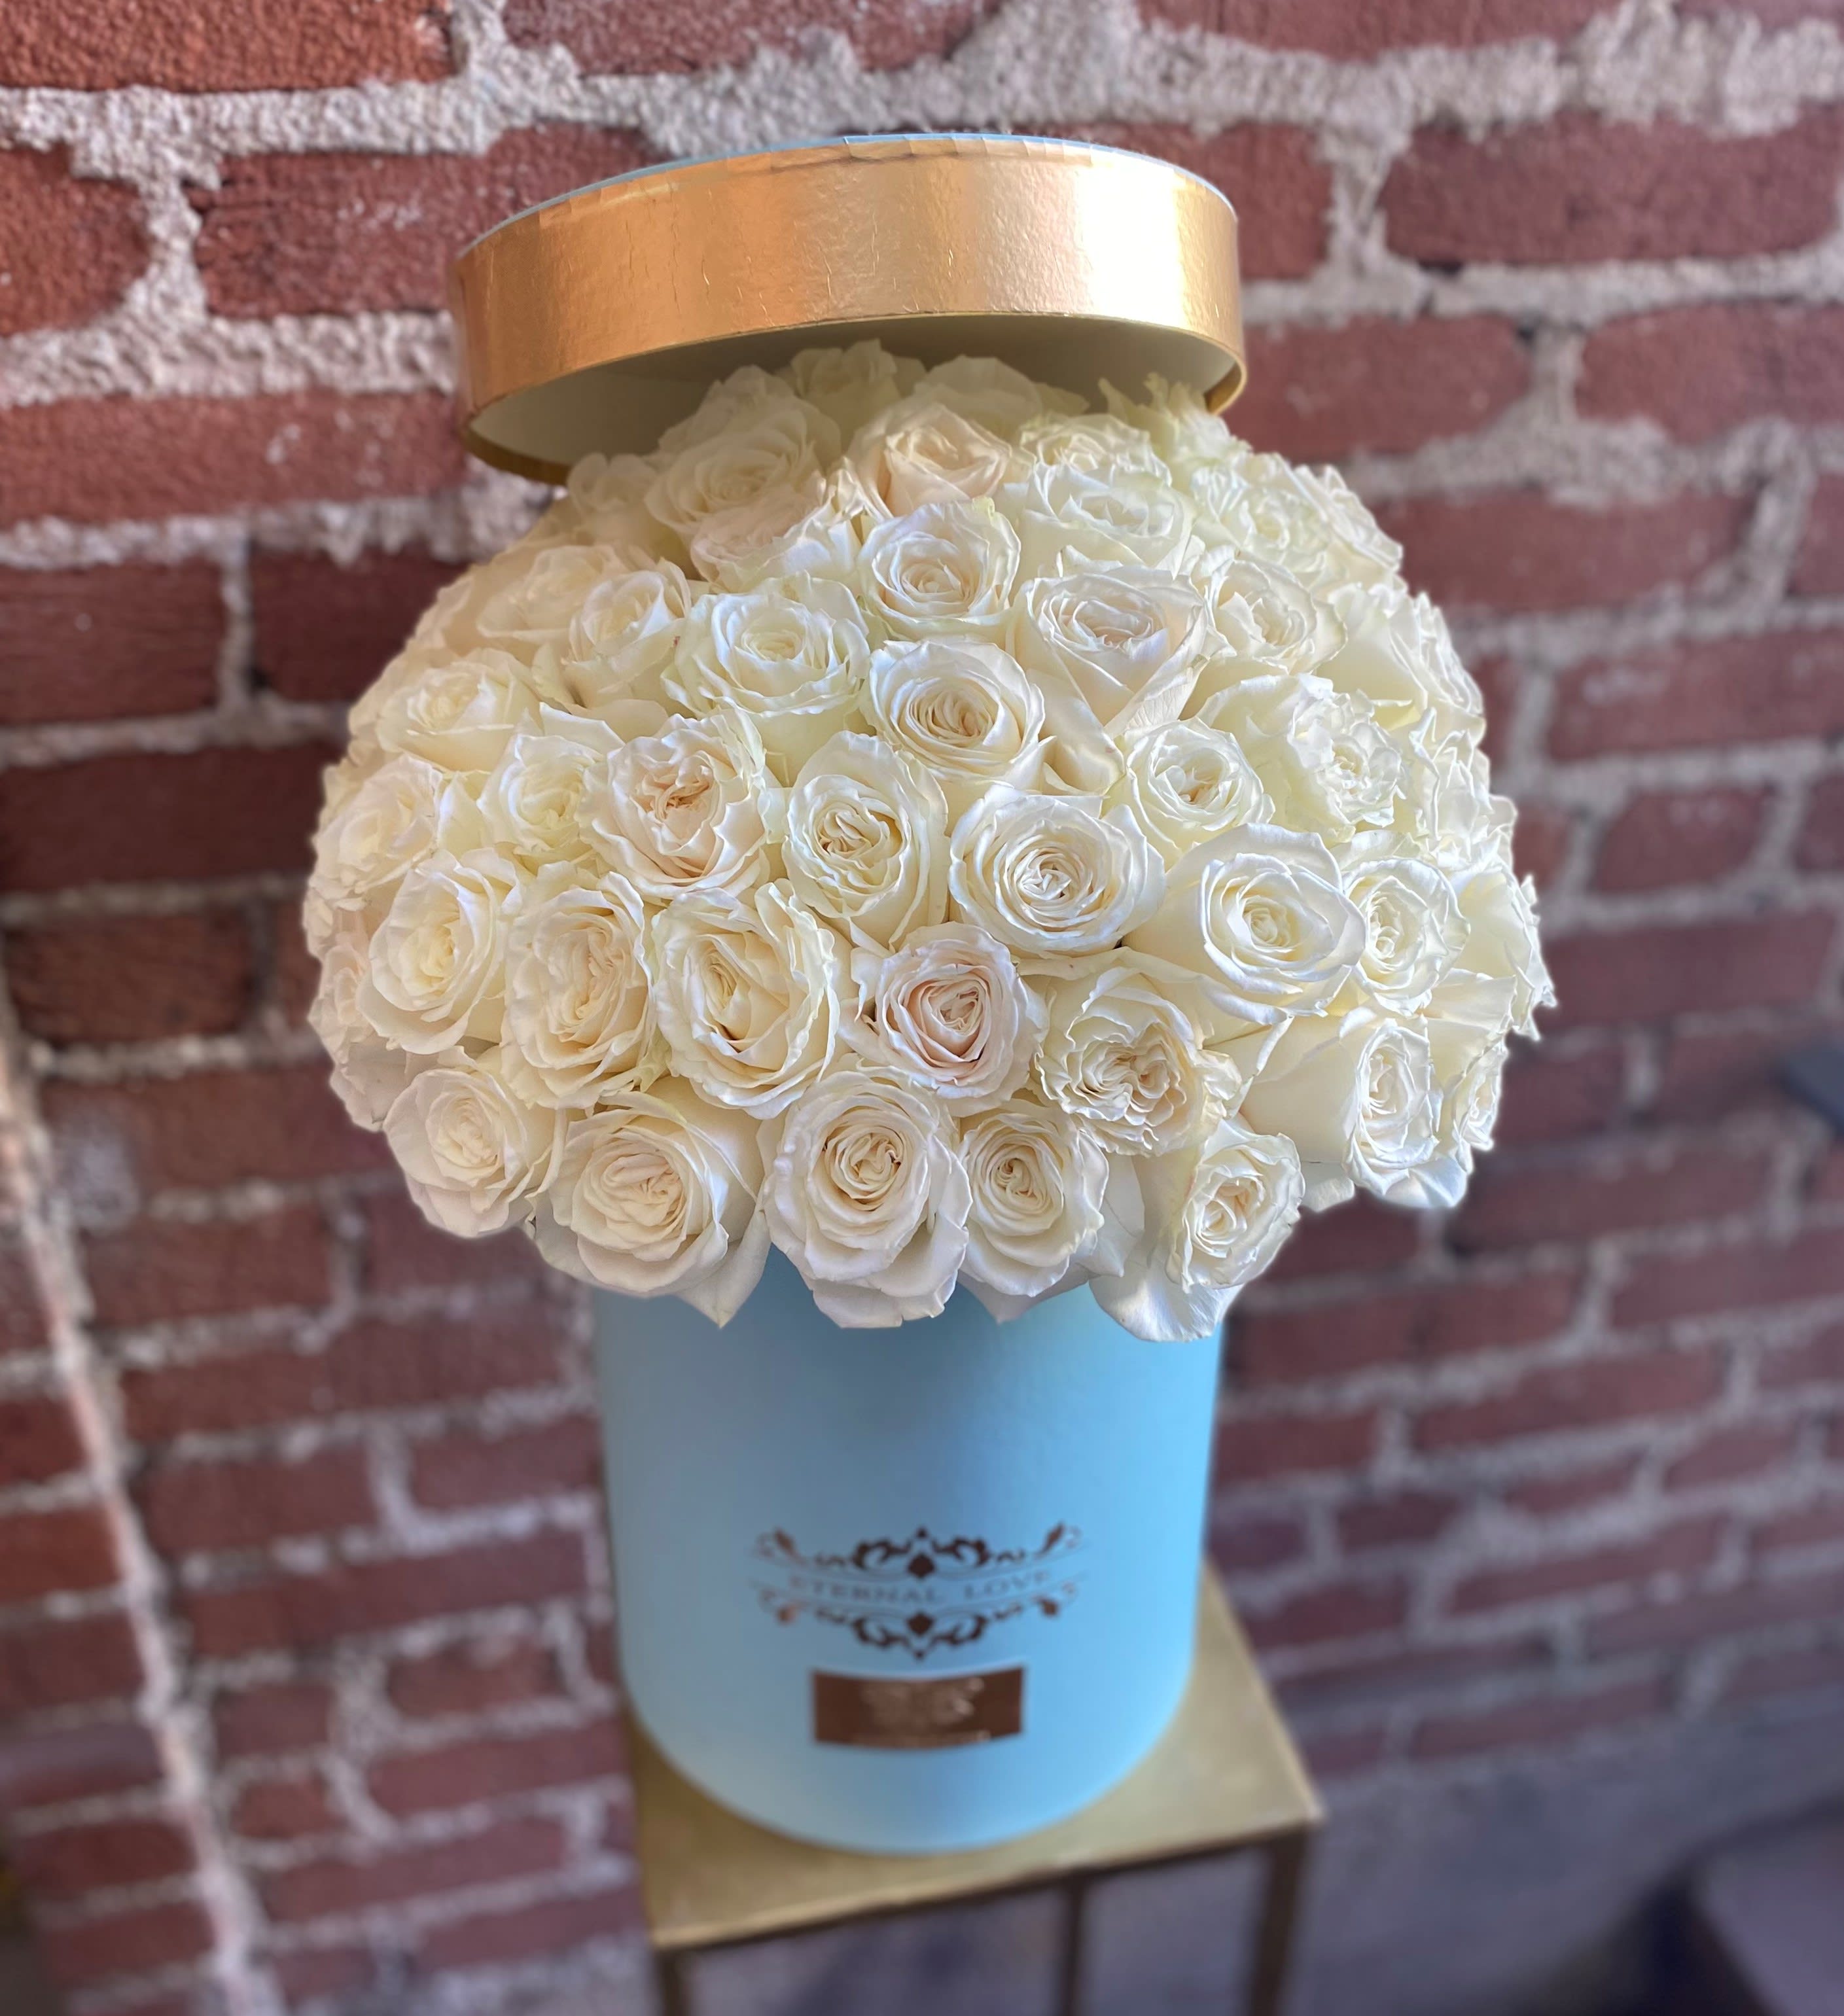 50 White Roses Box- Reseda Florist - These beautiful blooms will surely put a smile on a loved ones face. Filled with 50 roses of the highest quality, this will be a wonderful gift for that special someone! 